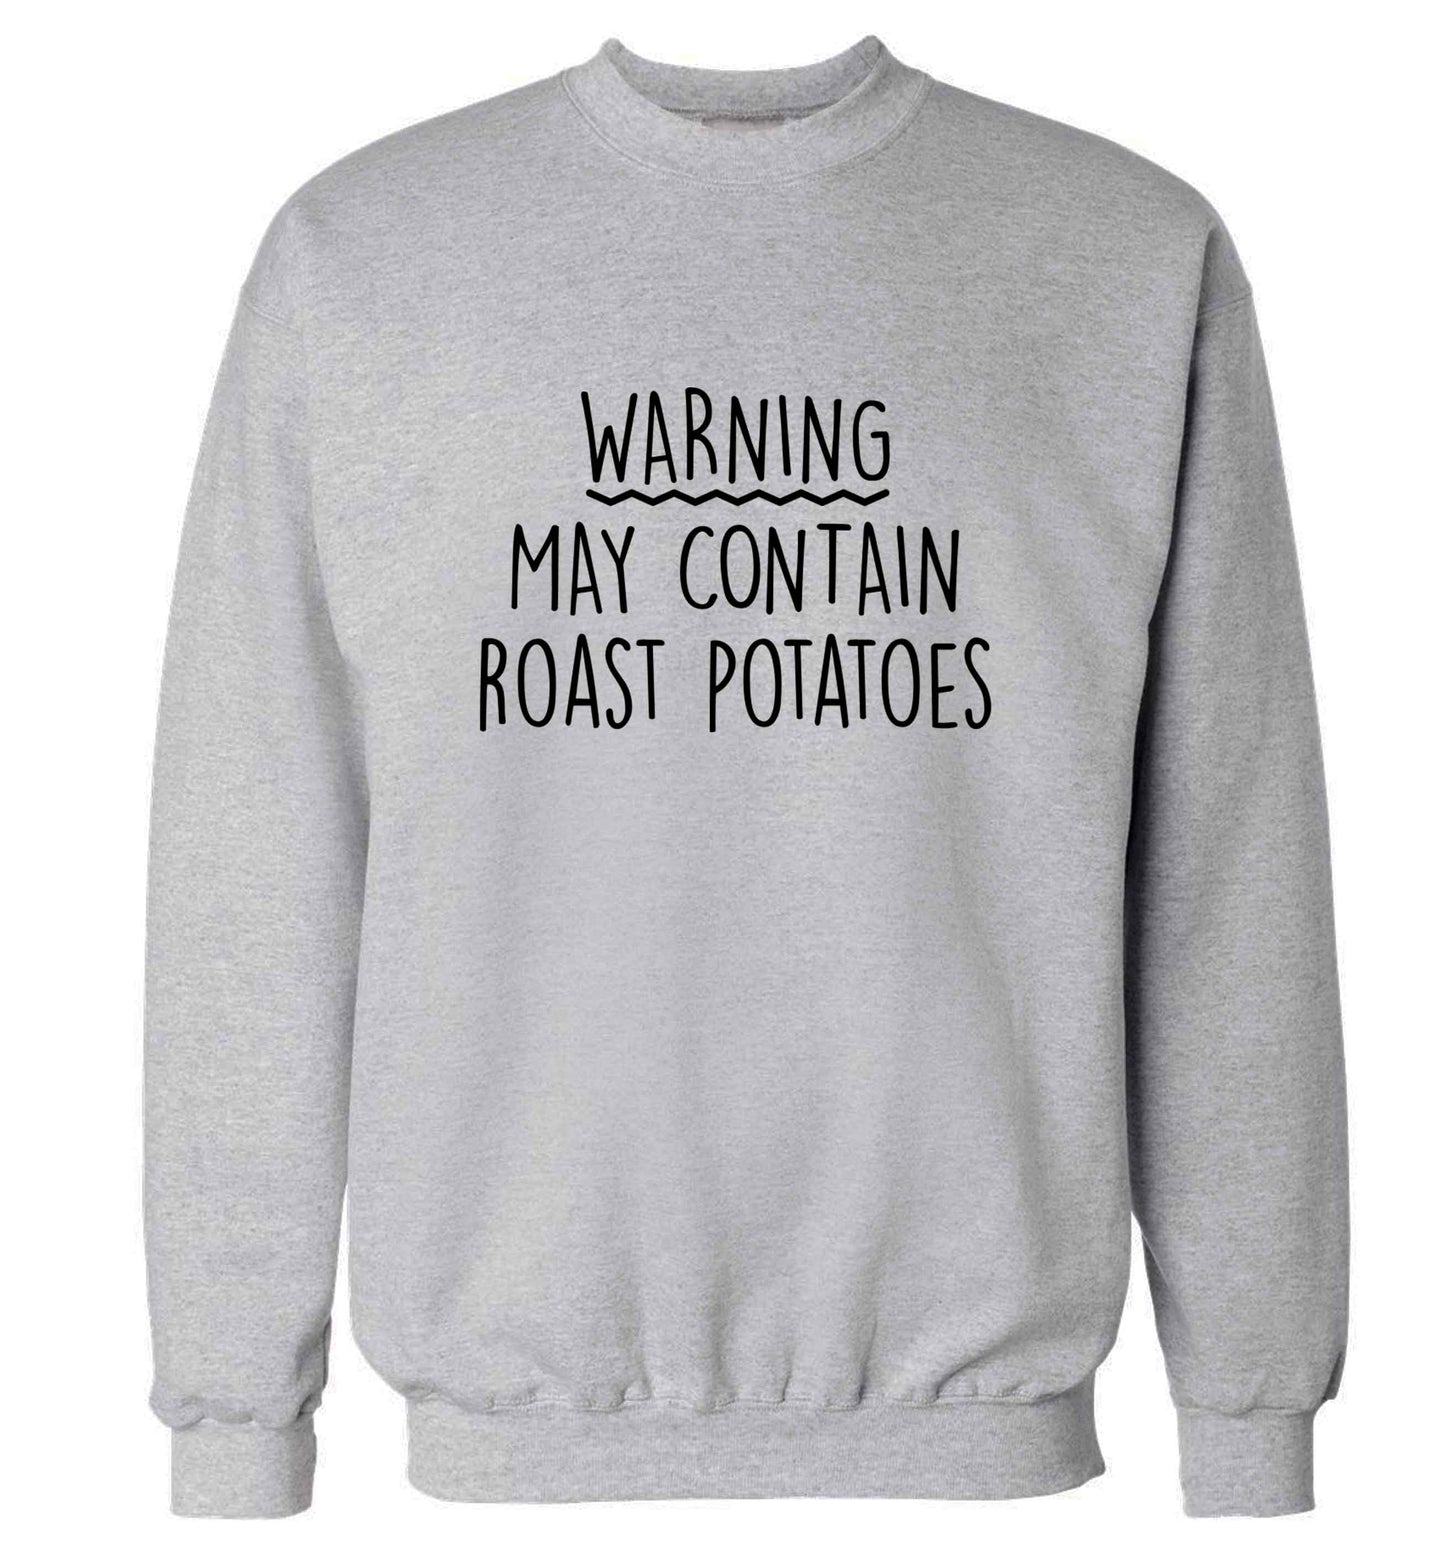 Warning may containg roast potatoes adult's unisex grey sweater 2XL